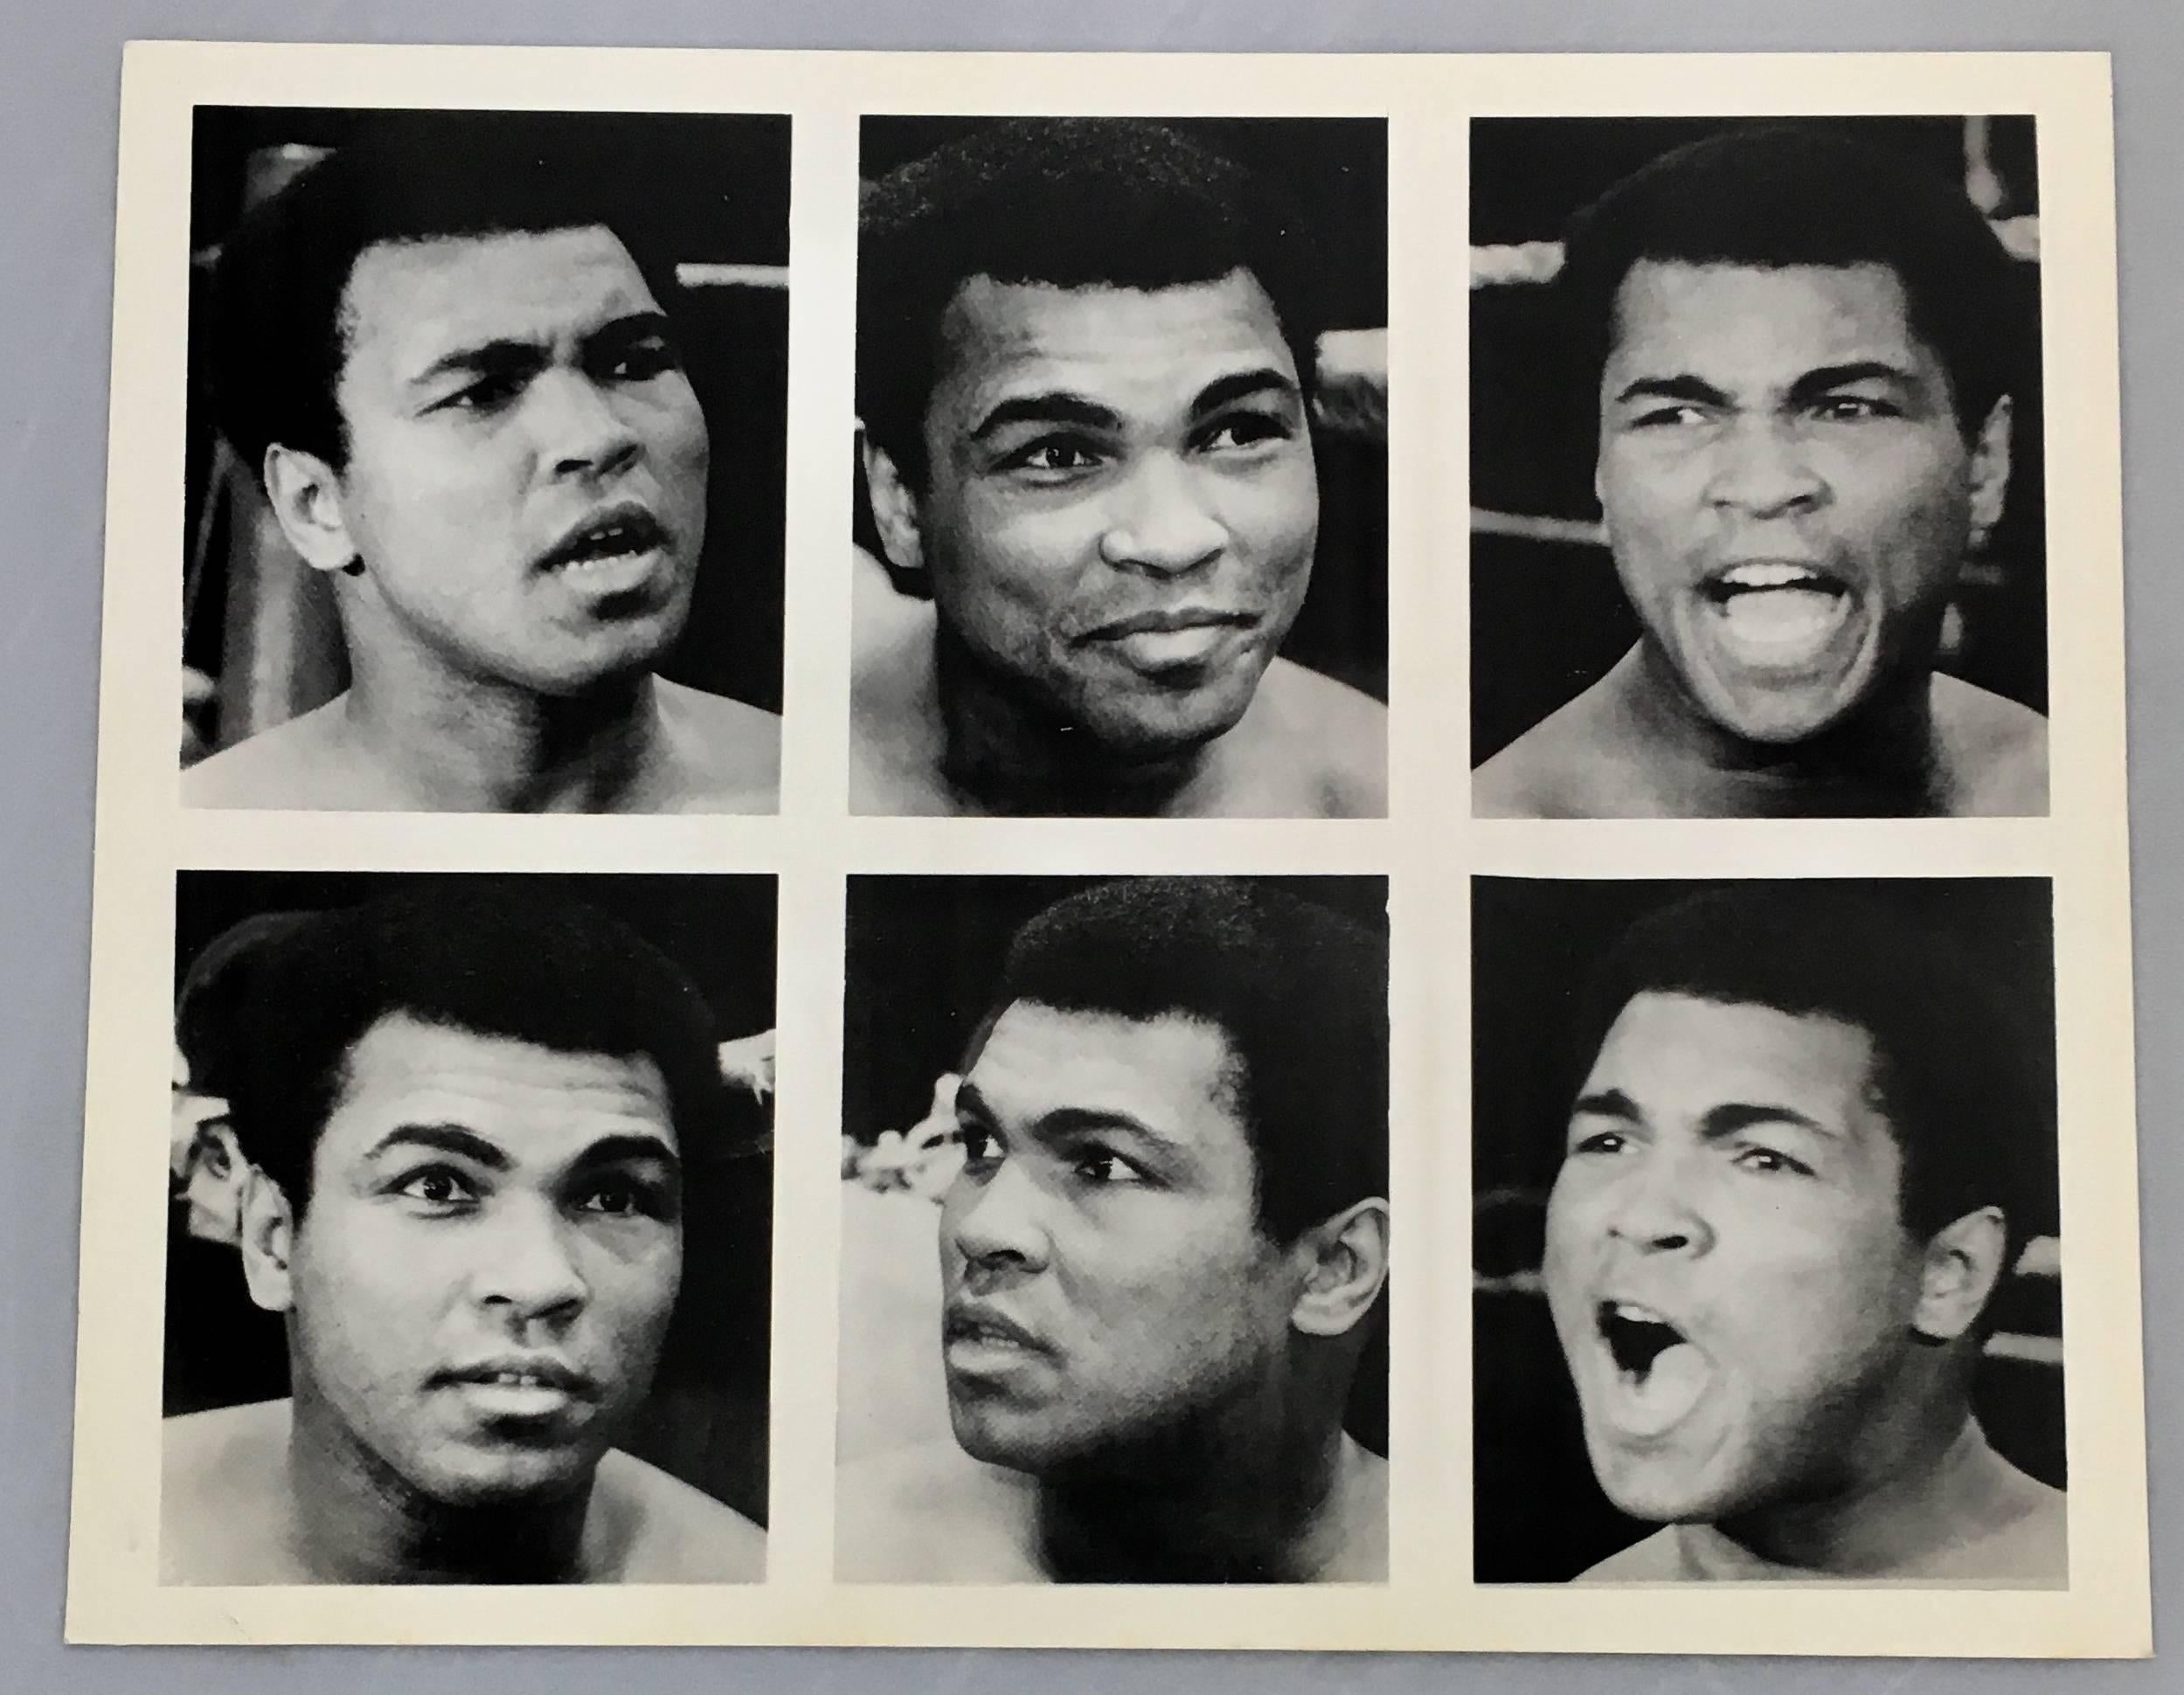 Muhammad Ali,
vintage original photograph circa mid-1970s. A fantastic frame piece with a Warhol inspired Pop Art feel. 

Silver gelatin print
Measures approximately 8 x 10 inches.
Some minor surface wear and signs of handling; otherwise very